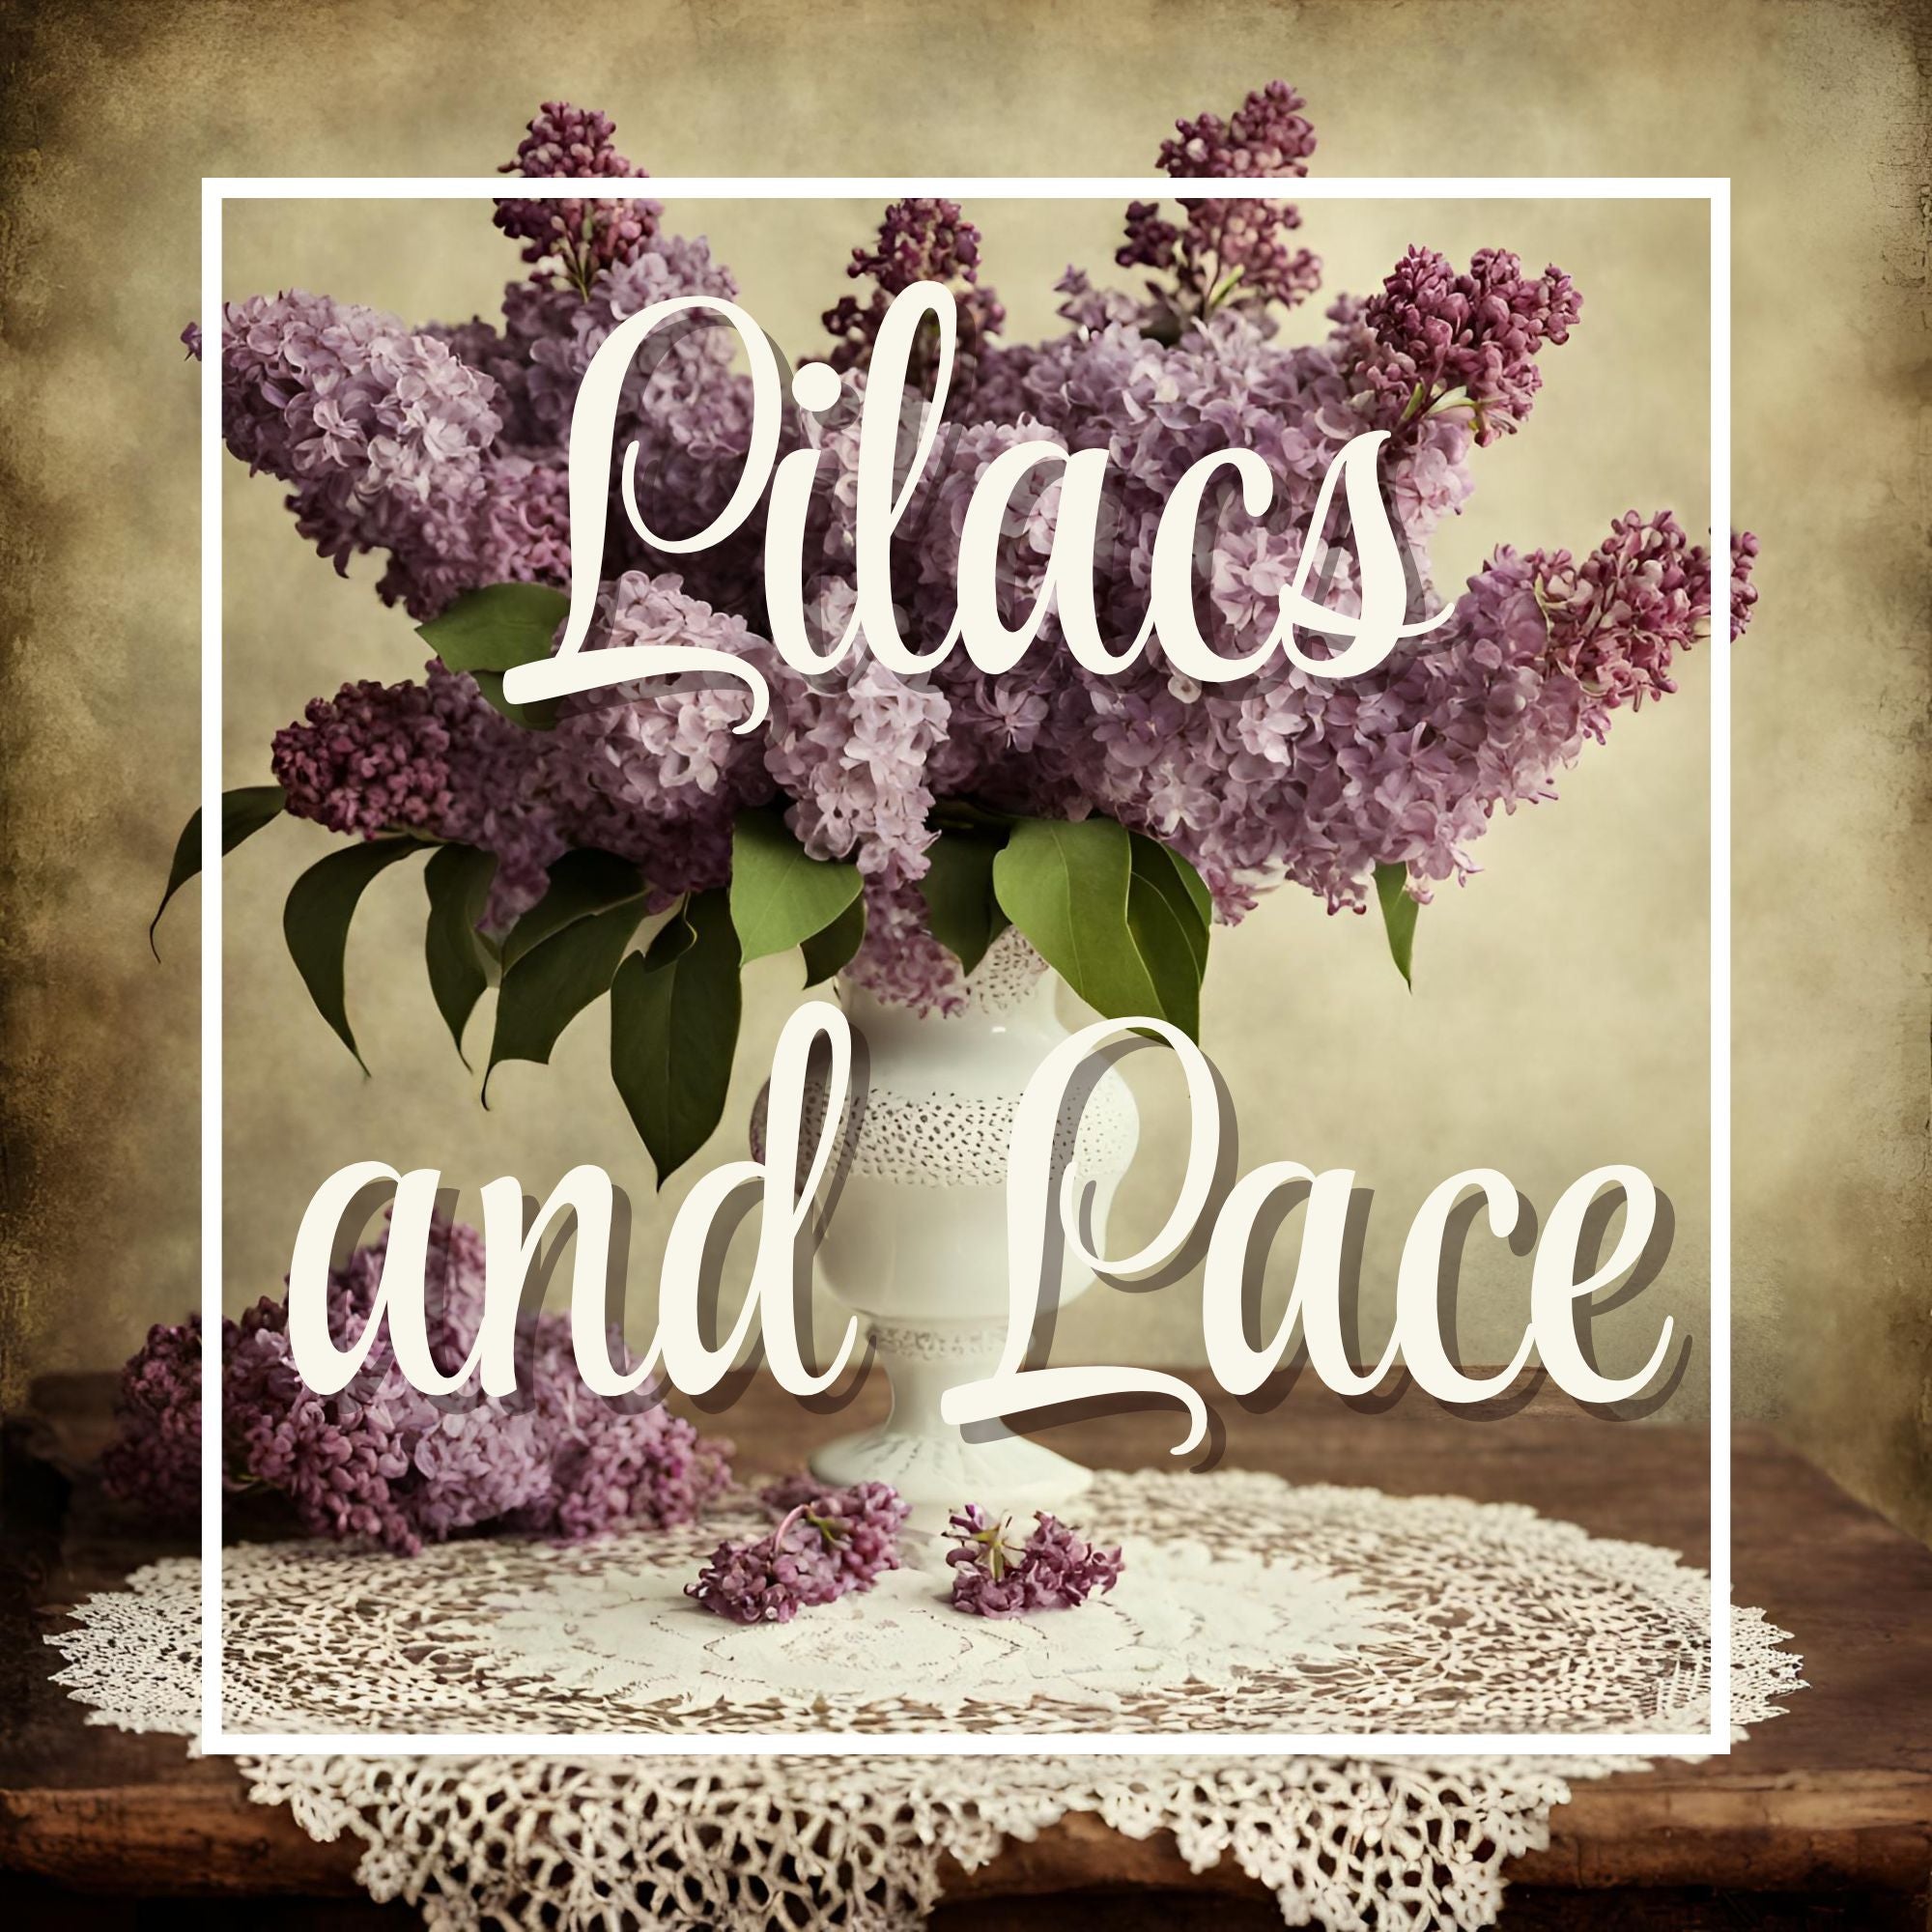 Lilacs and Lace | The Columbia Fragrance Co.